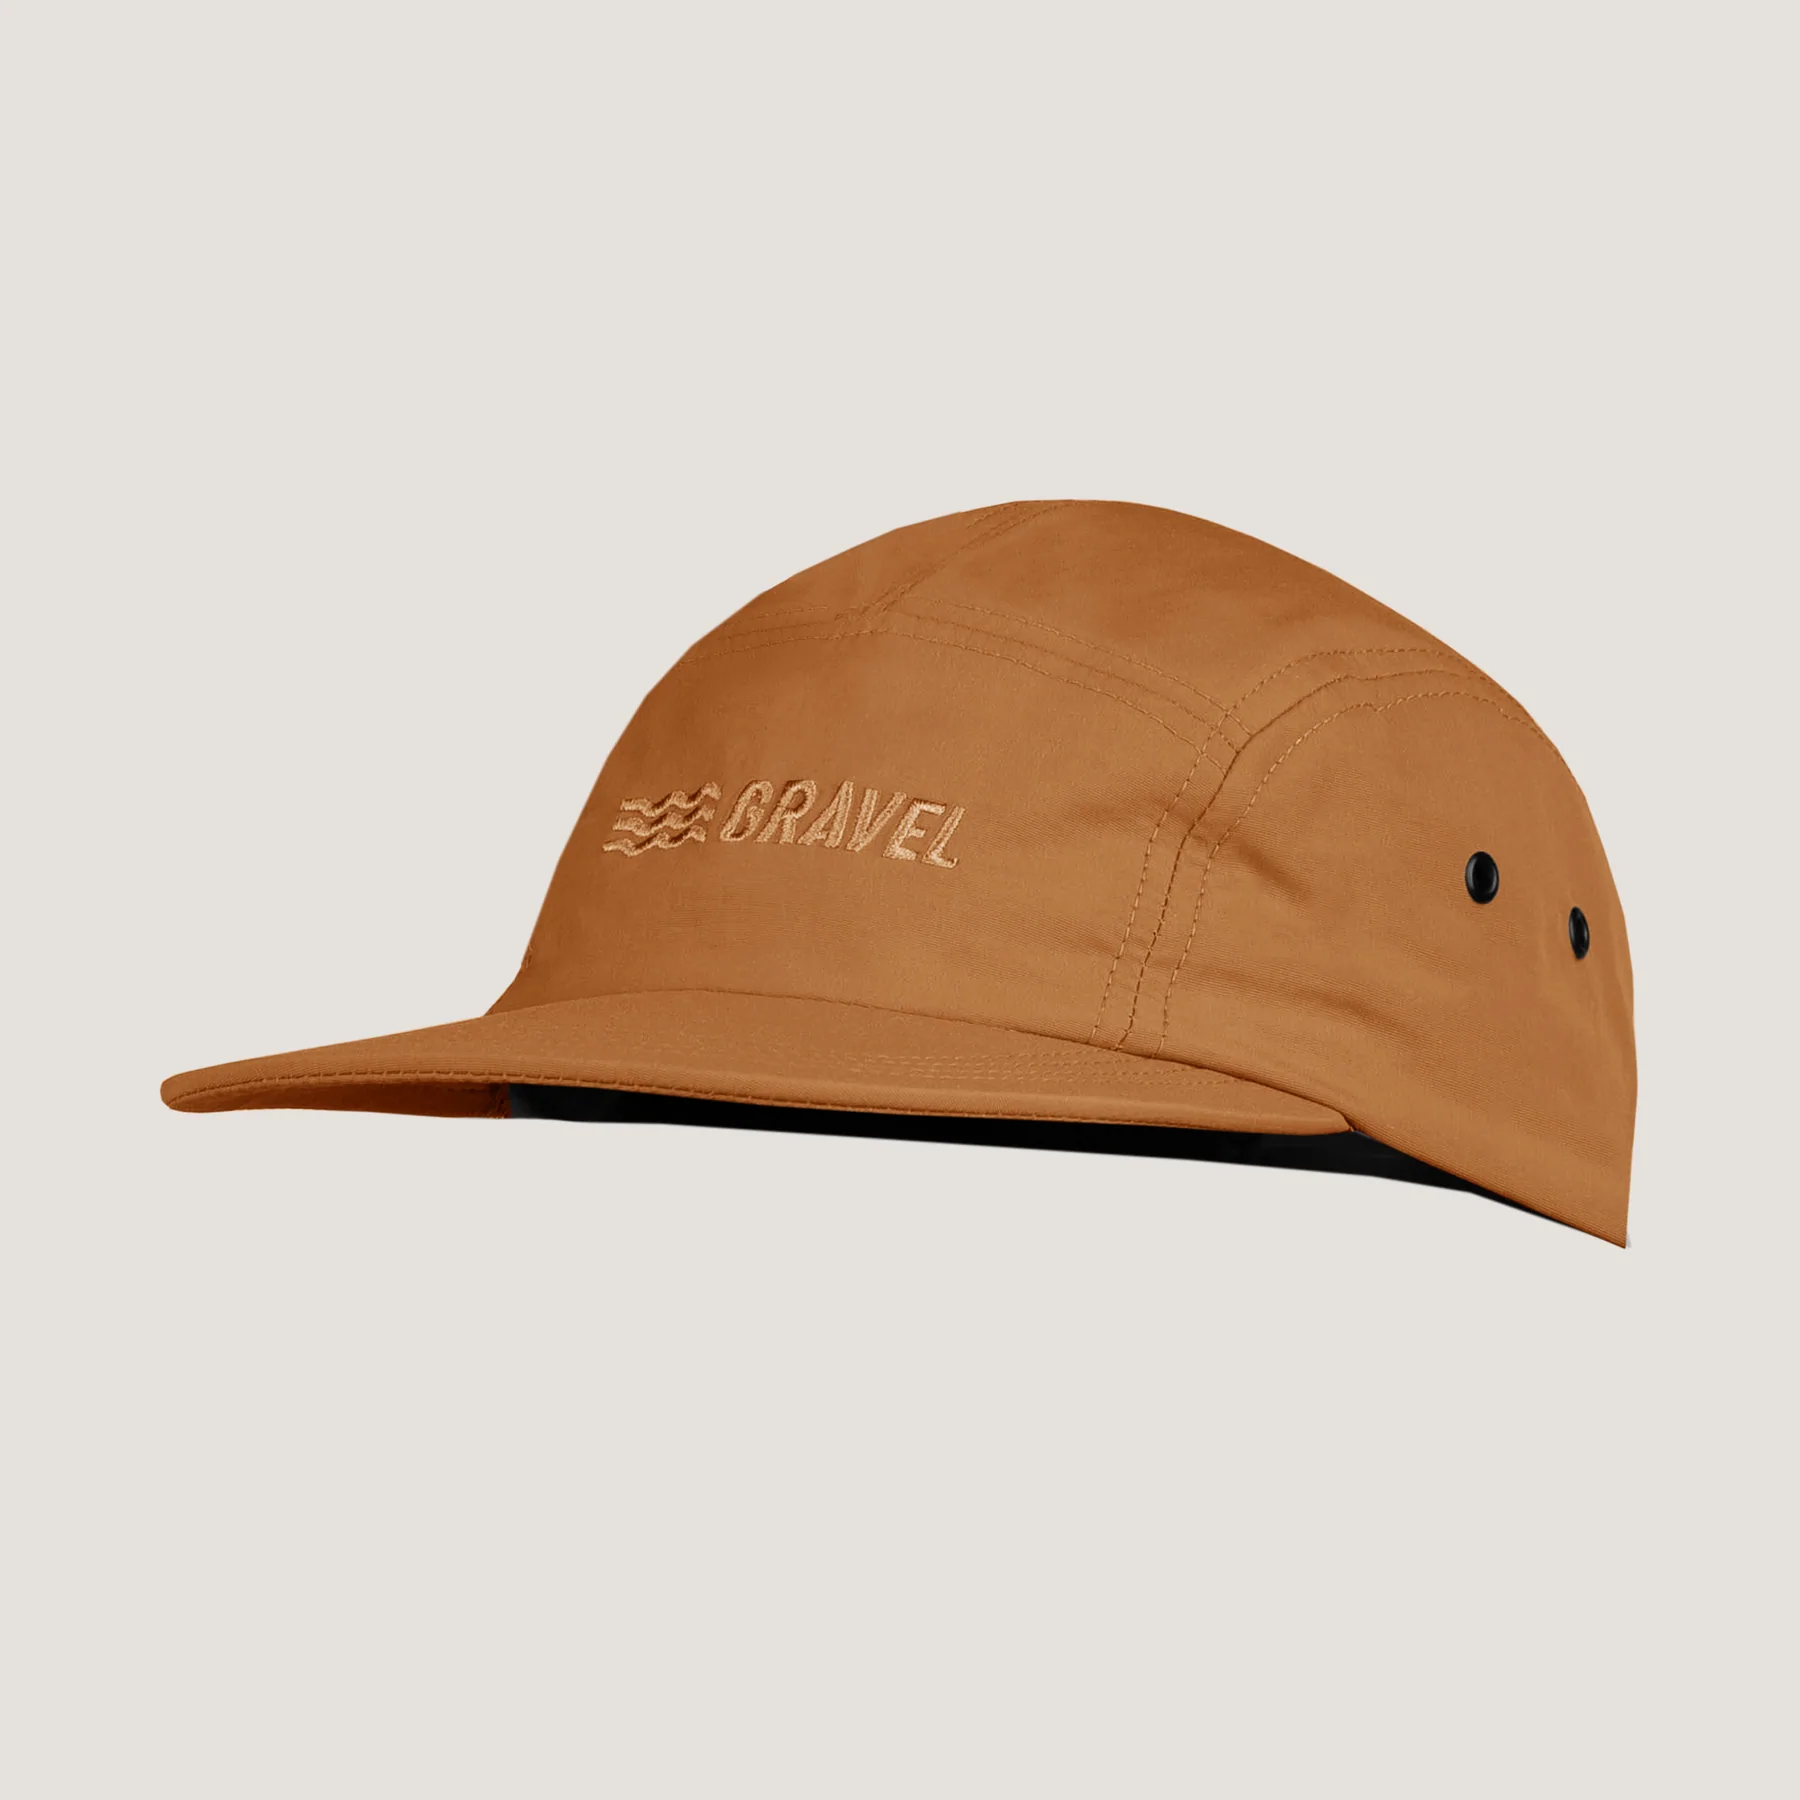 The Travelers Hat by Gravel